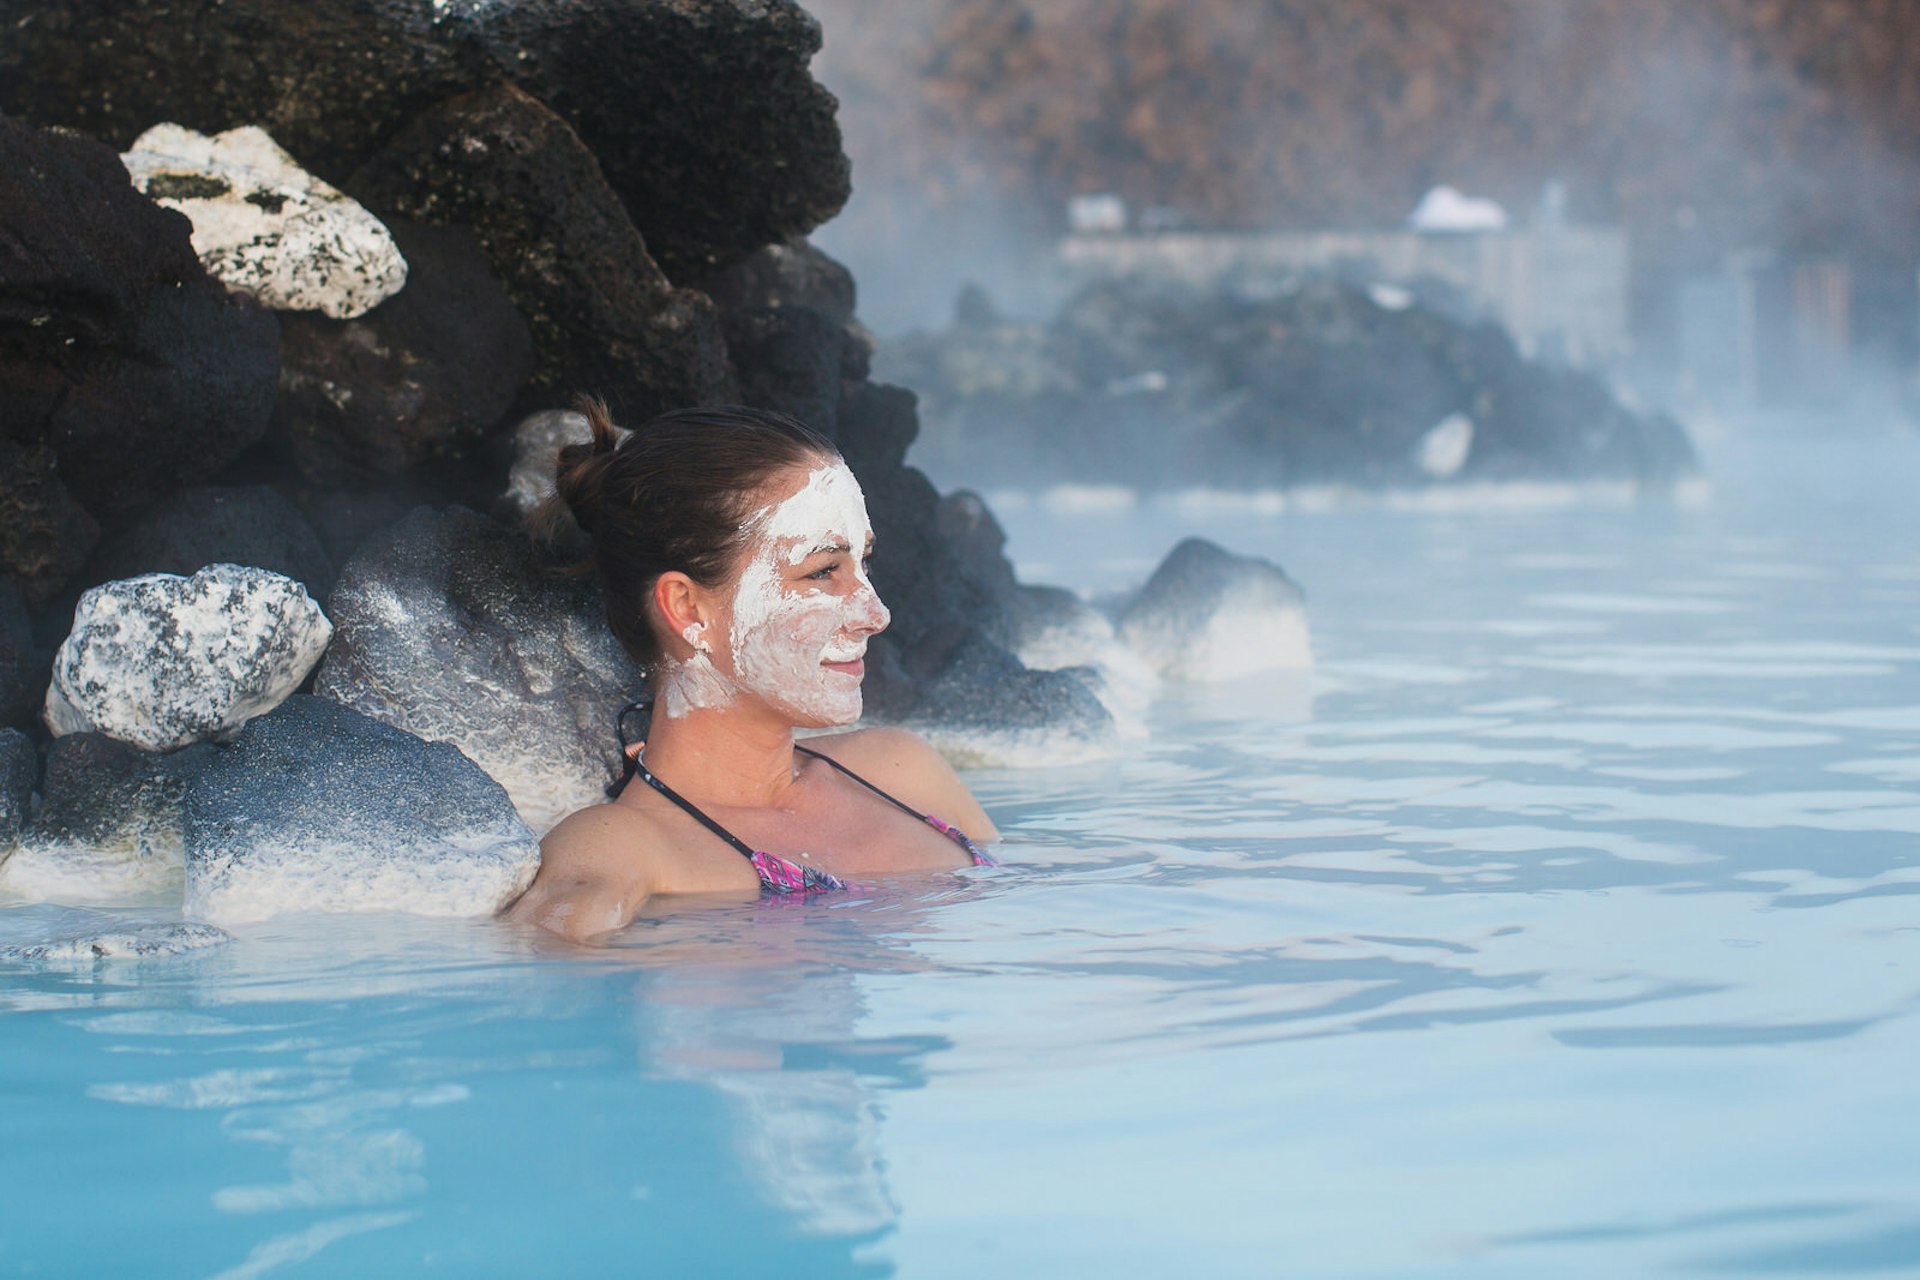 Slap on some silica and relax in the Blue Lagoon's balmy waters © dmitry_islentev / Shutterstock